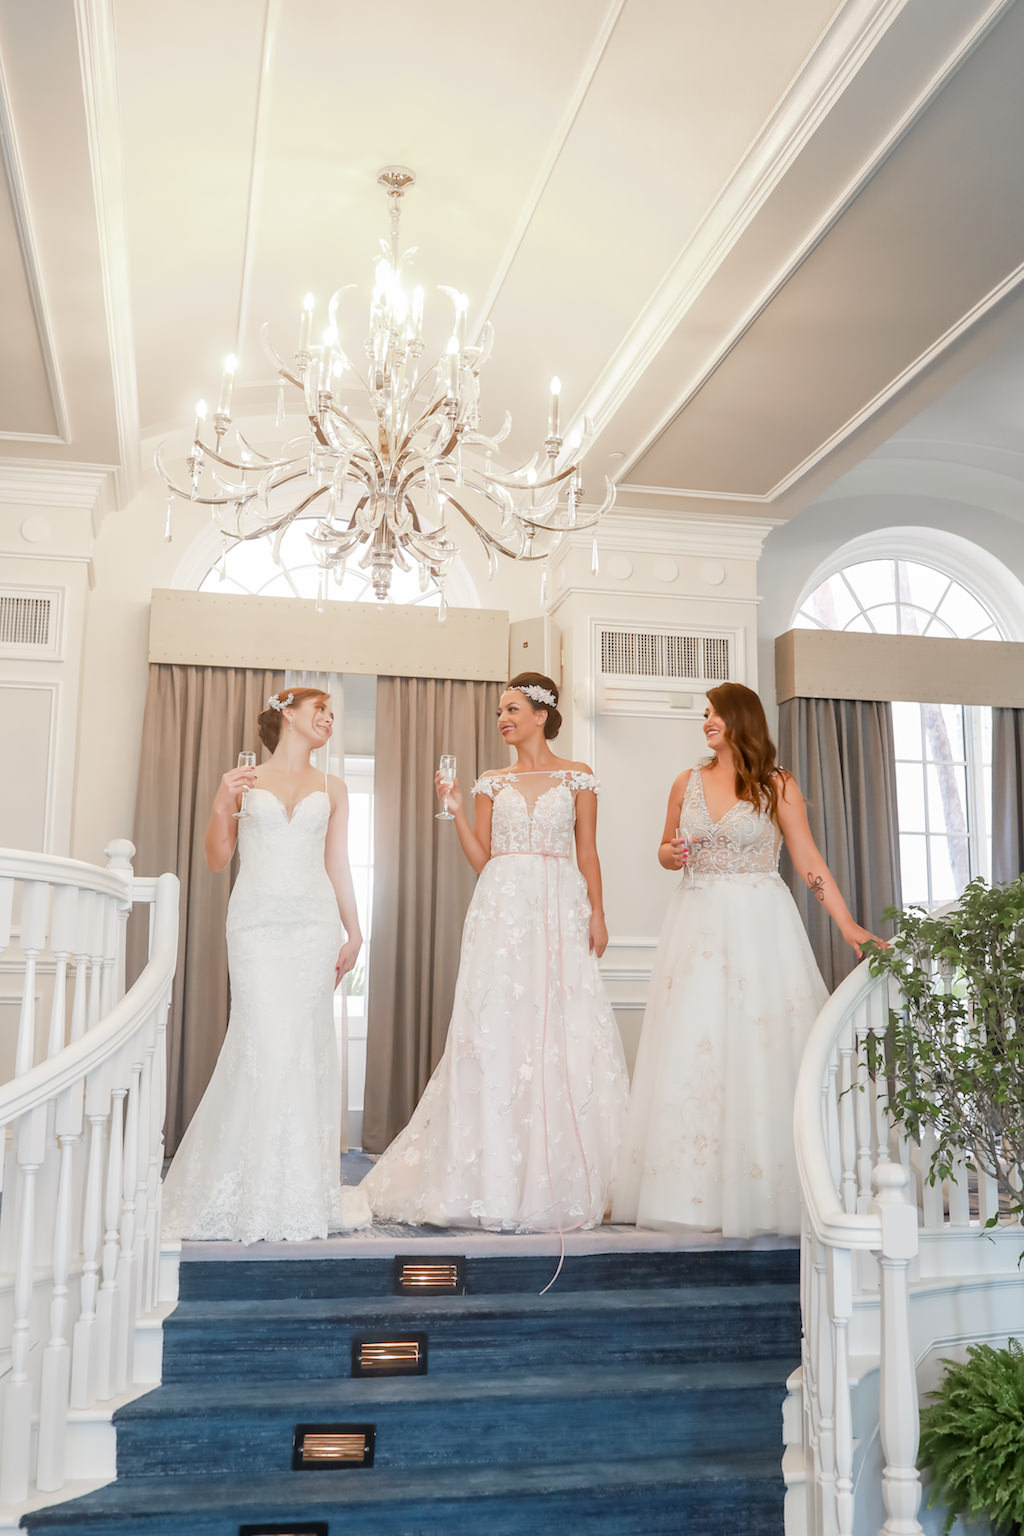 Wedding Dresses by Truly Forever Bridal | St. Petersburg Photographer Lifelong Photography Studios | Marry Me Tampa Bay Before 5 Networking Event at the Don Cesar Hotel